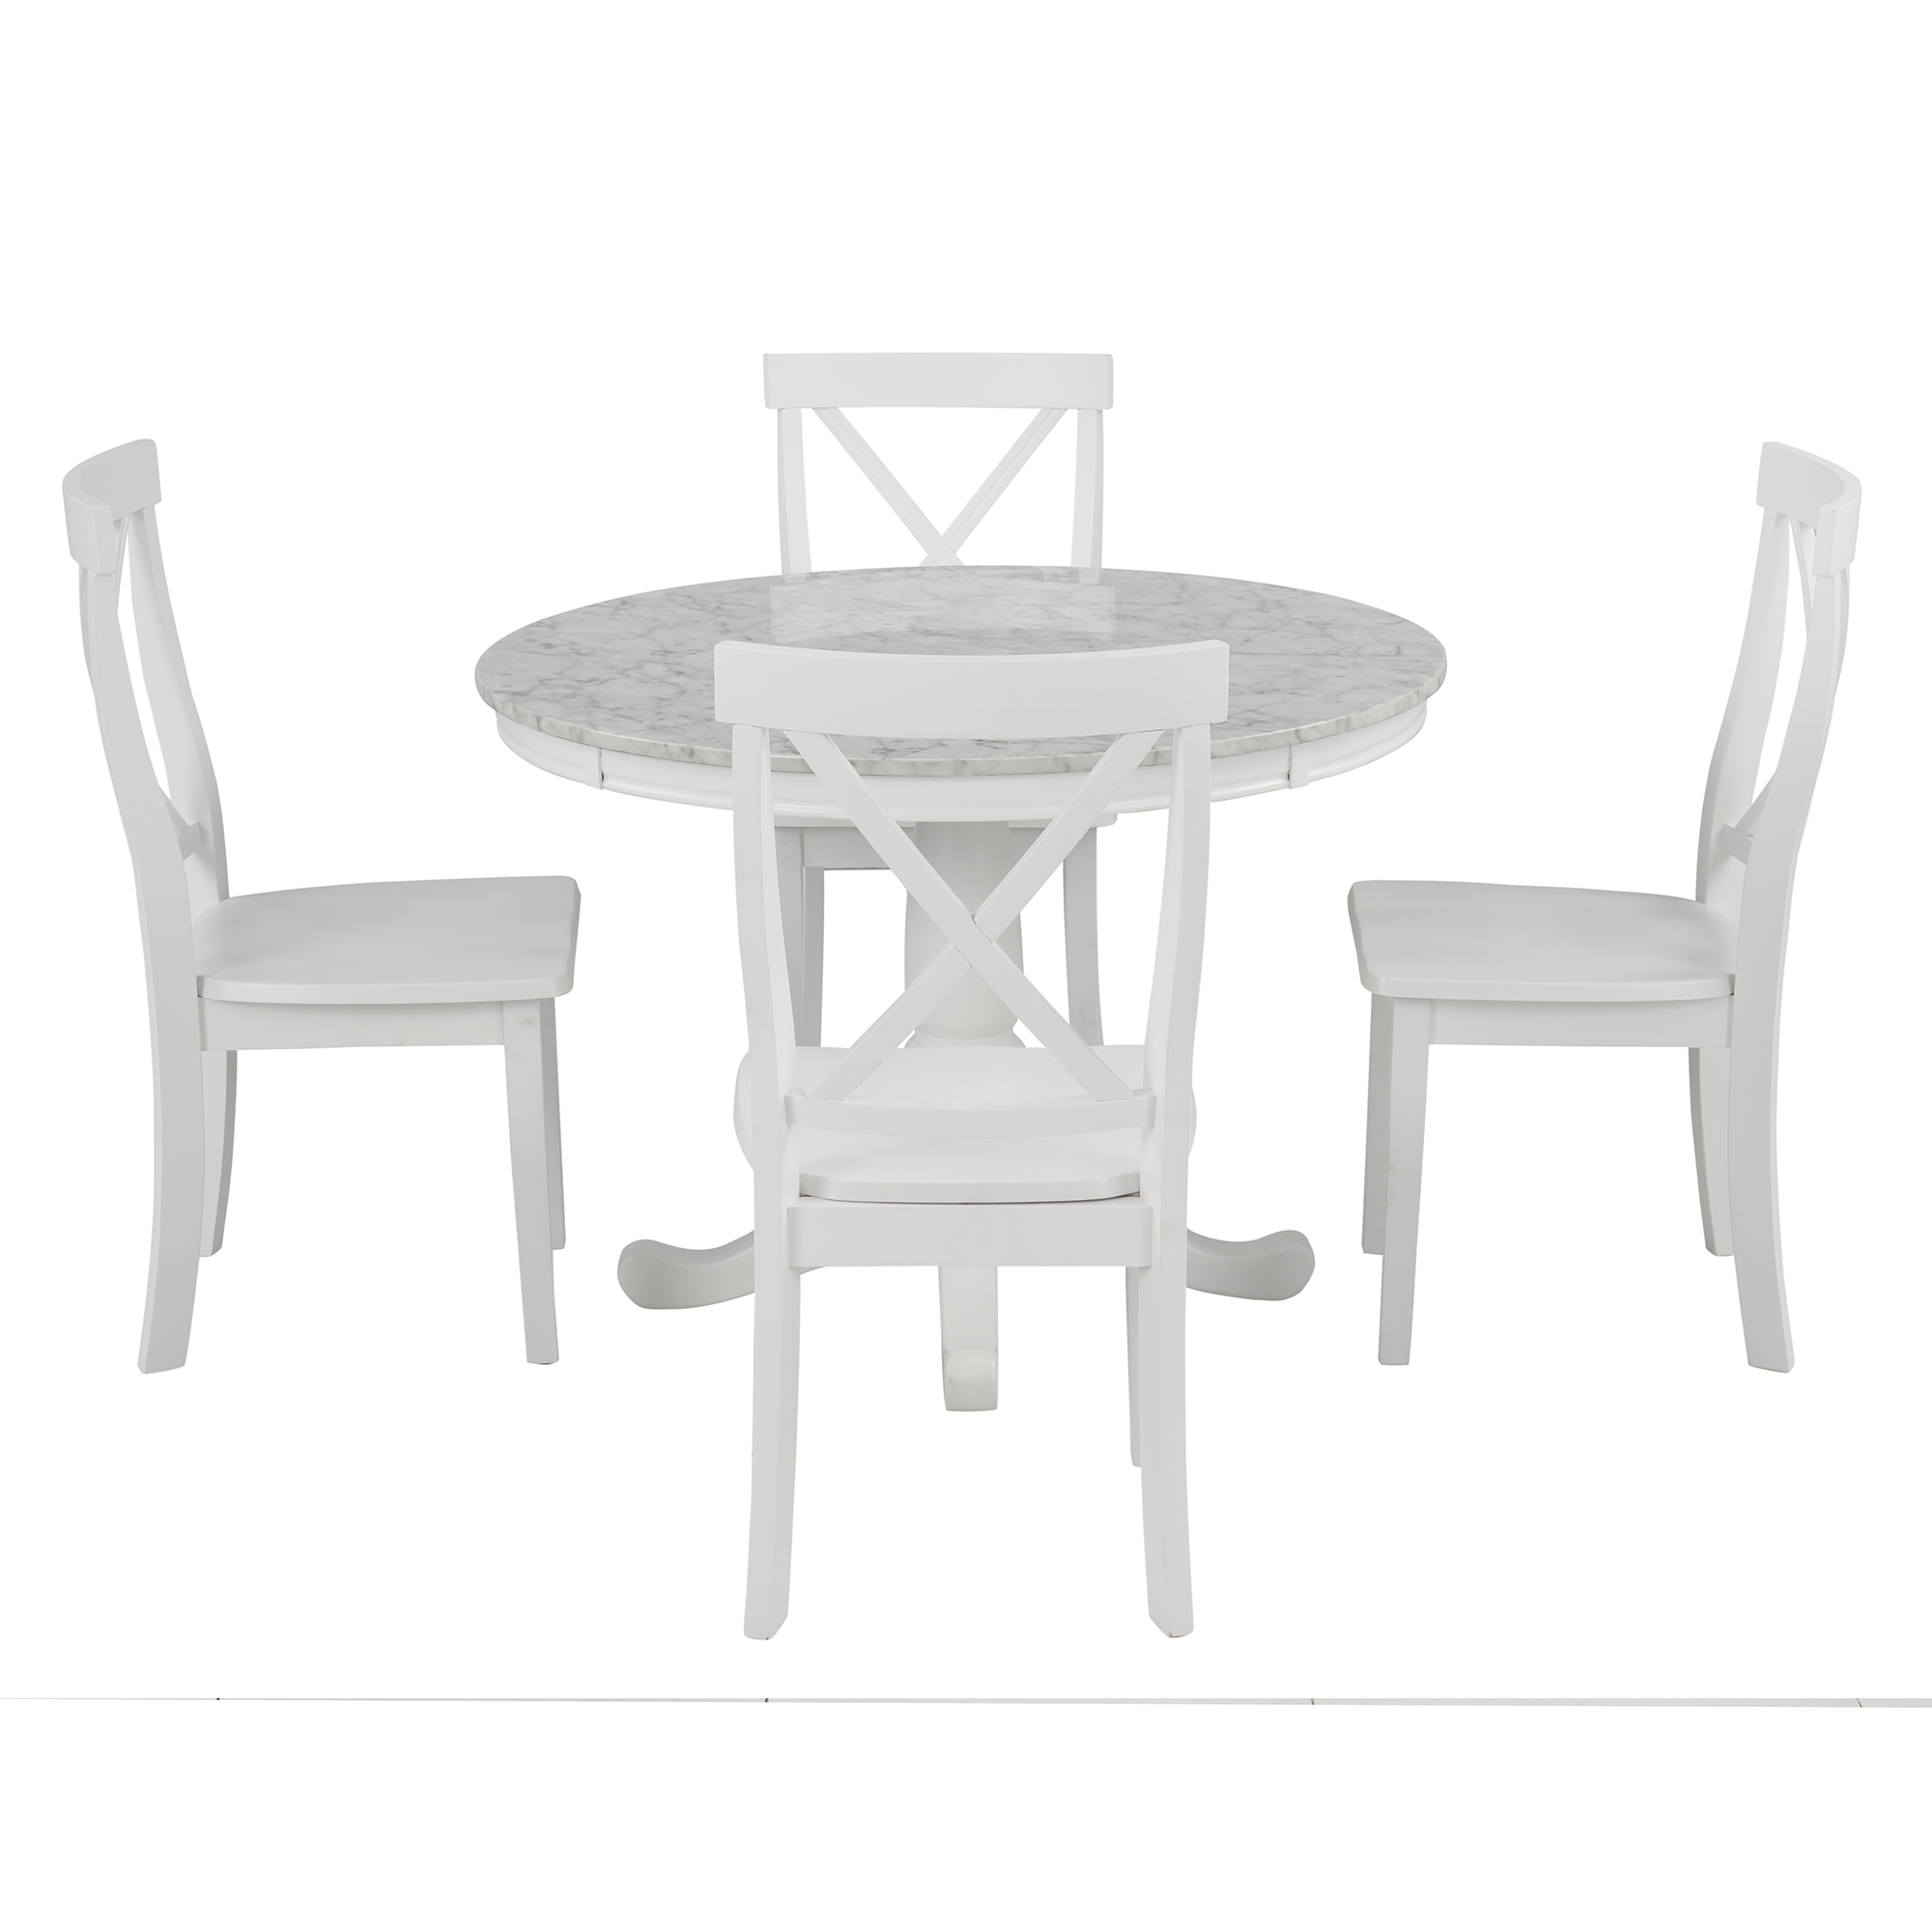 5 Pieces Dining Table And Chairs Set For 4 Persons - SG000340AAA